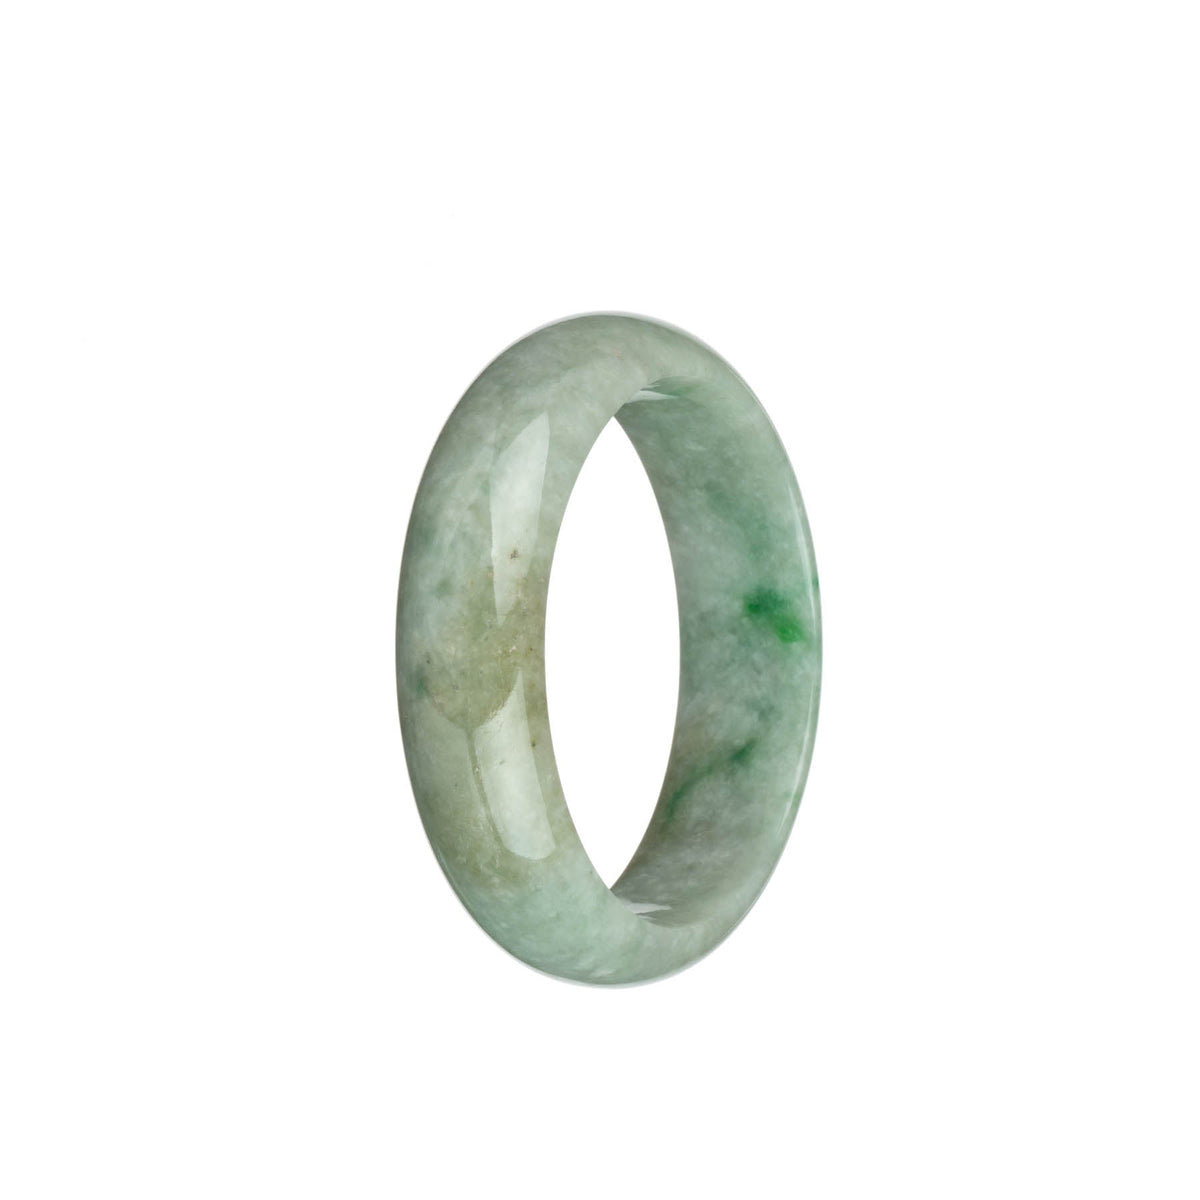 A beautiful traditional jade bracelet with a half moon shape, featuring genuine Type A light grey jade with emerald green patterns and light brown patches. Perfect for adding a touch of elegance to any outfit.